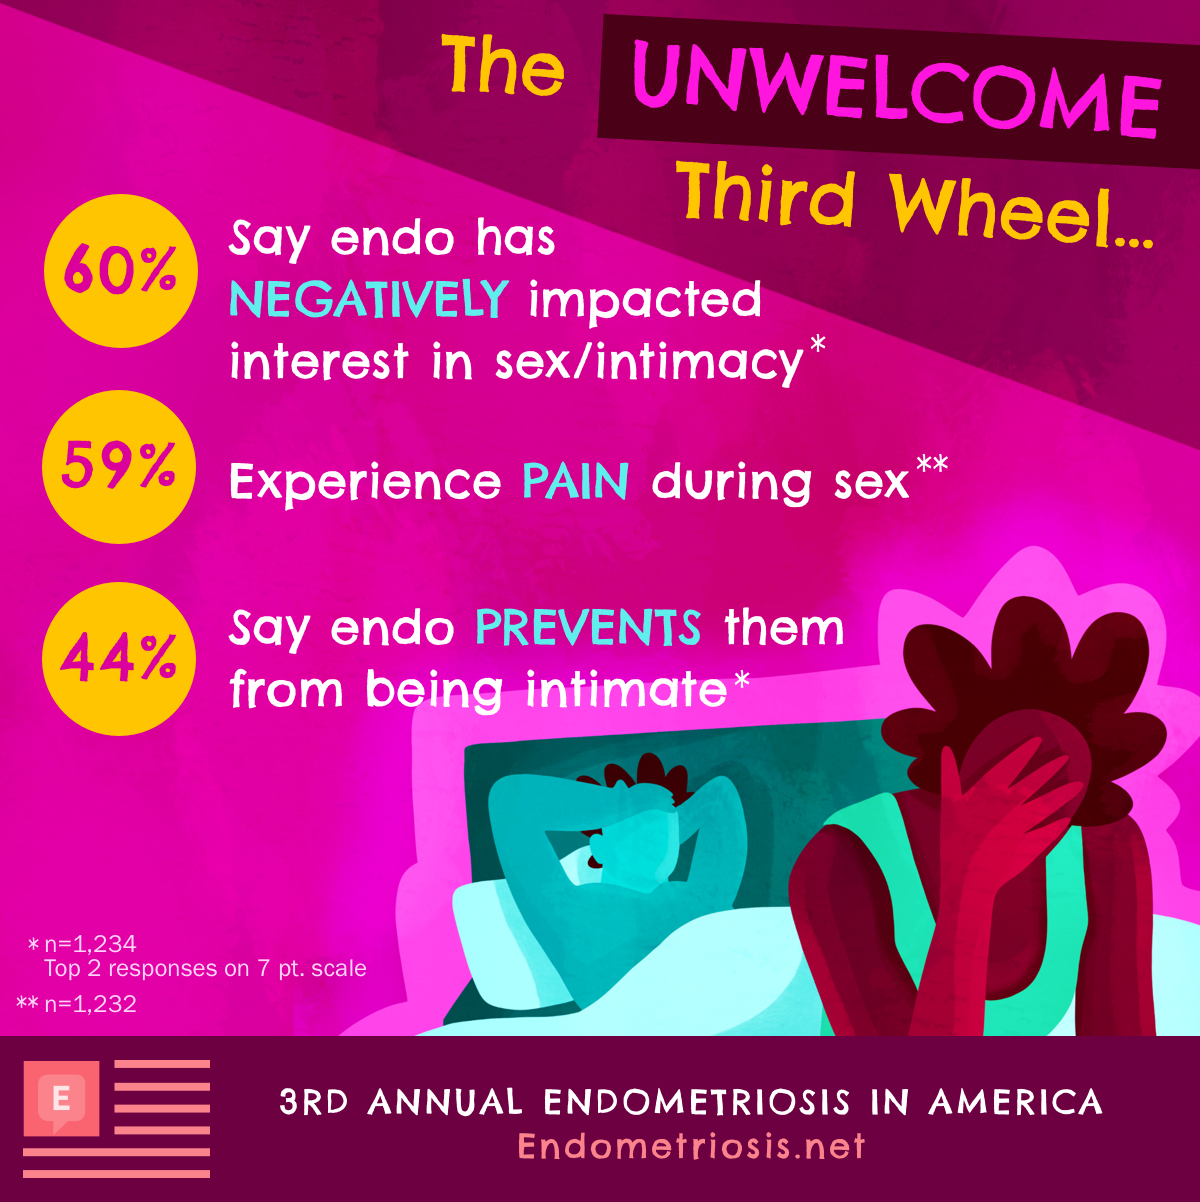 60% say endo has negatively impacted interest in sex/intimacy, 59% experience pain during sex, 44% say endo prevents them from being intimate